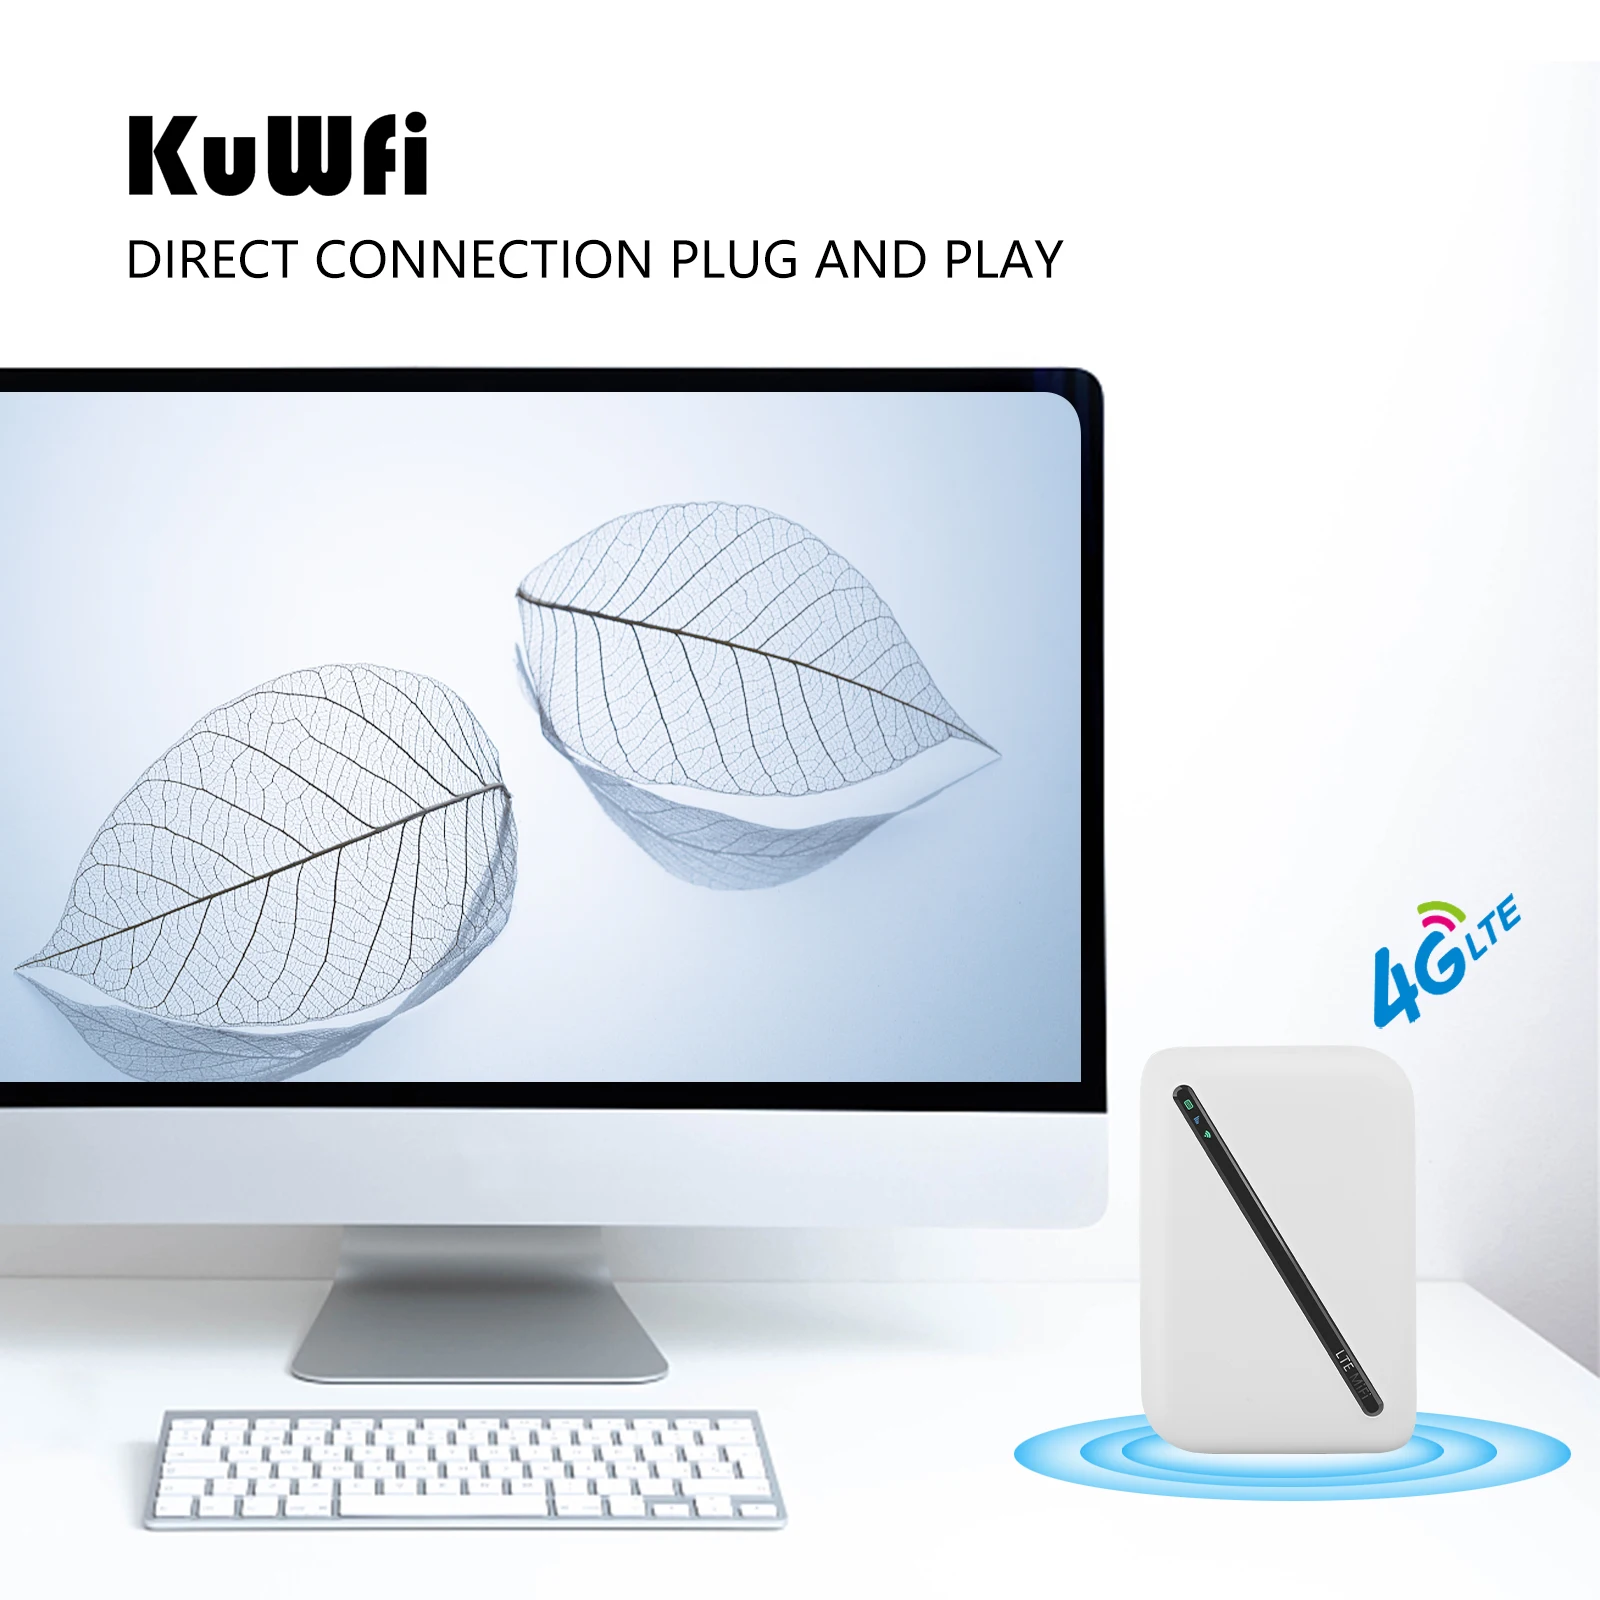 KuWFi 4g WiFi Router With Sim Card Slot 150Mbps Mobile WiFi Hotspot Device High Speed Wi-Fi Portable Router With 2100mAh Battery